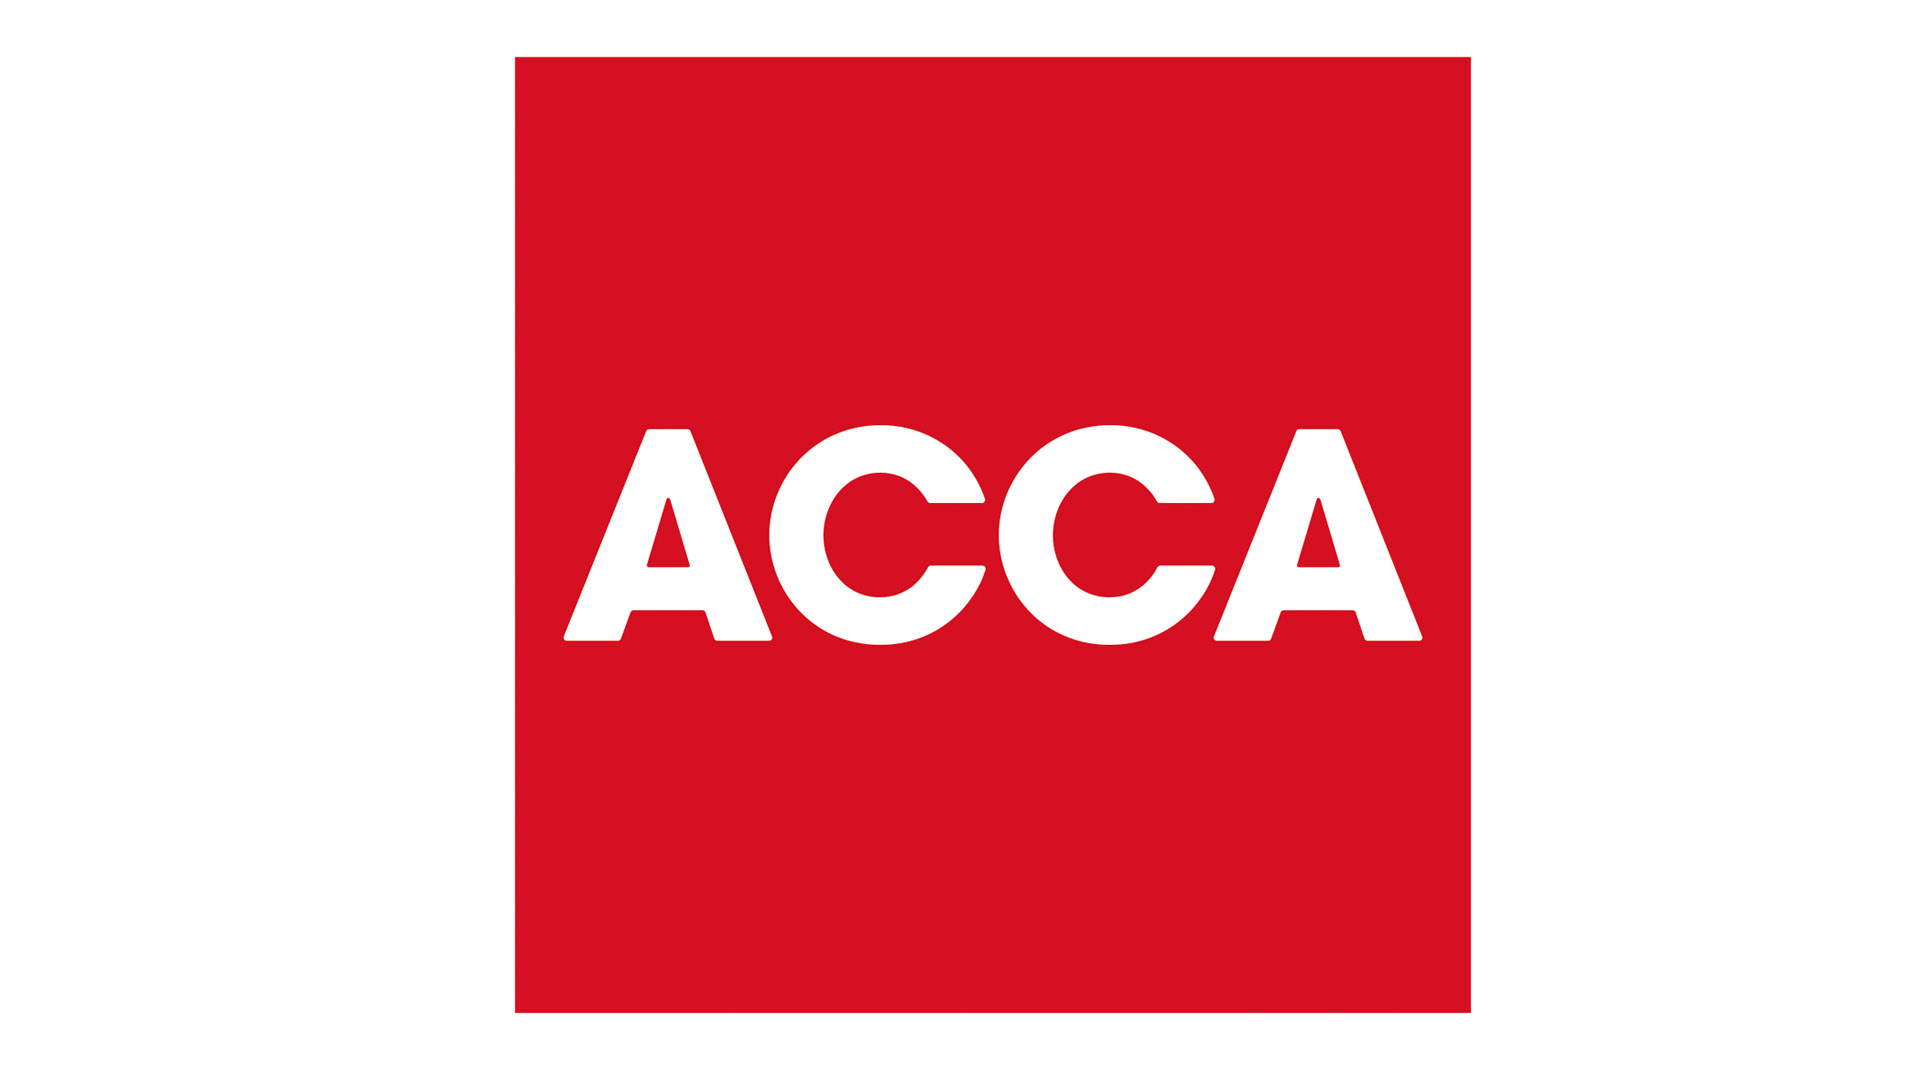 ACCA: Your Pathway to a Global Accounting Career